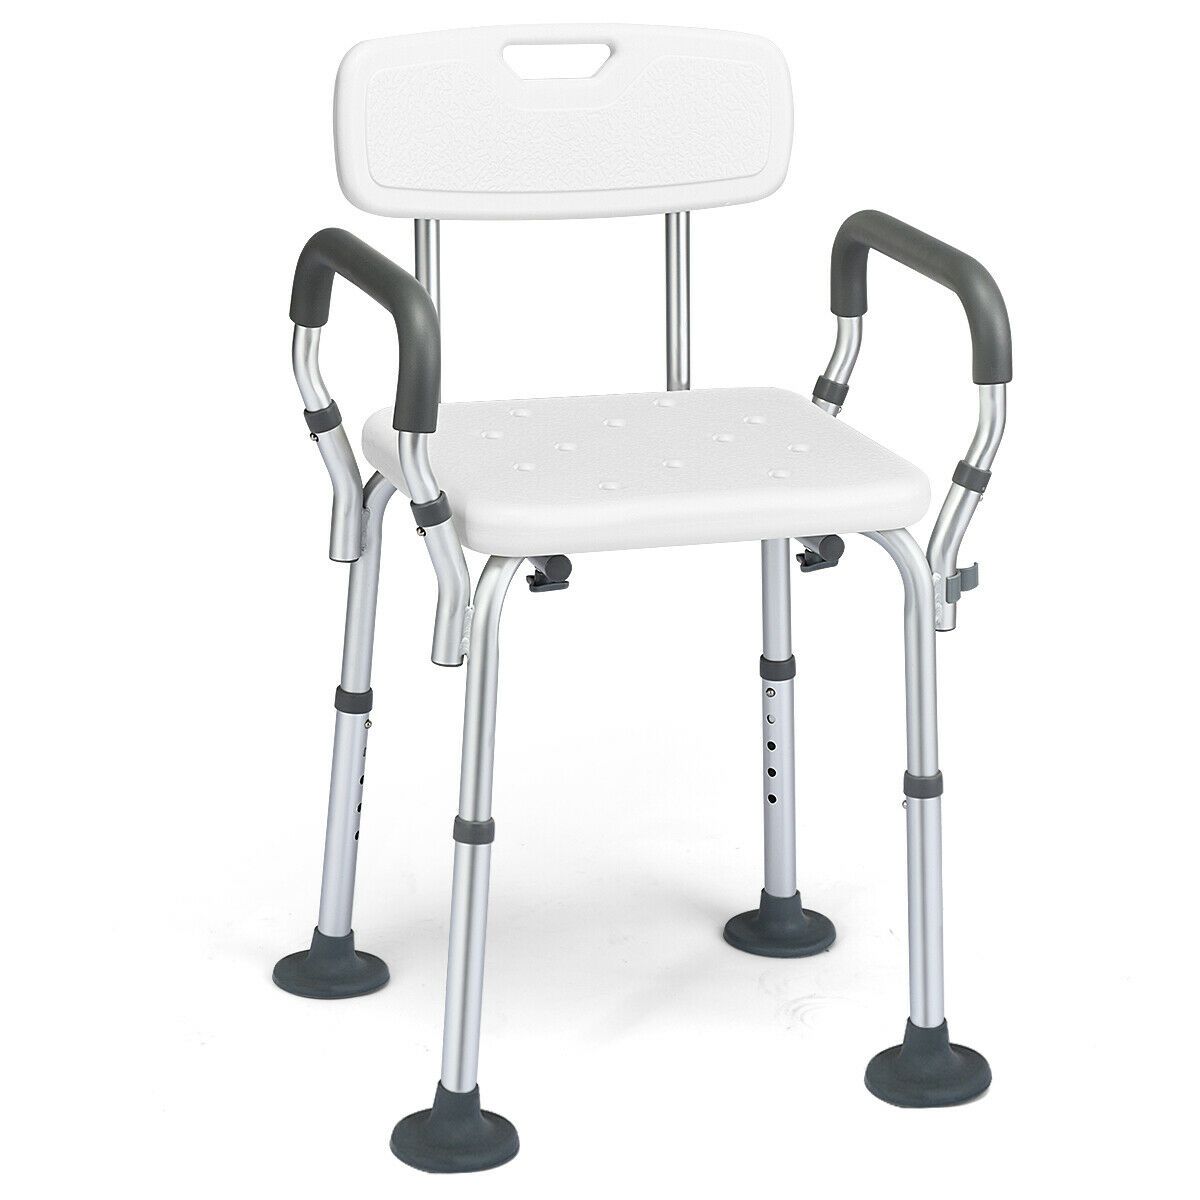 EVA Padded Shower Chair w/ Arms and Back for Seniors Disabled Tool